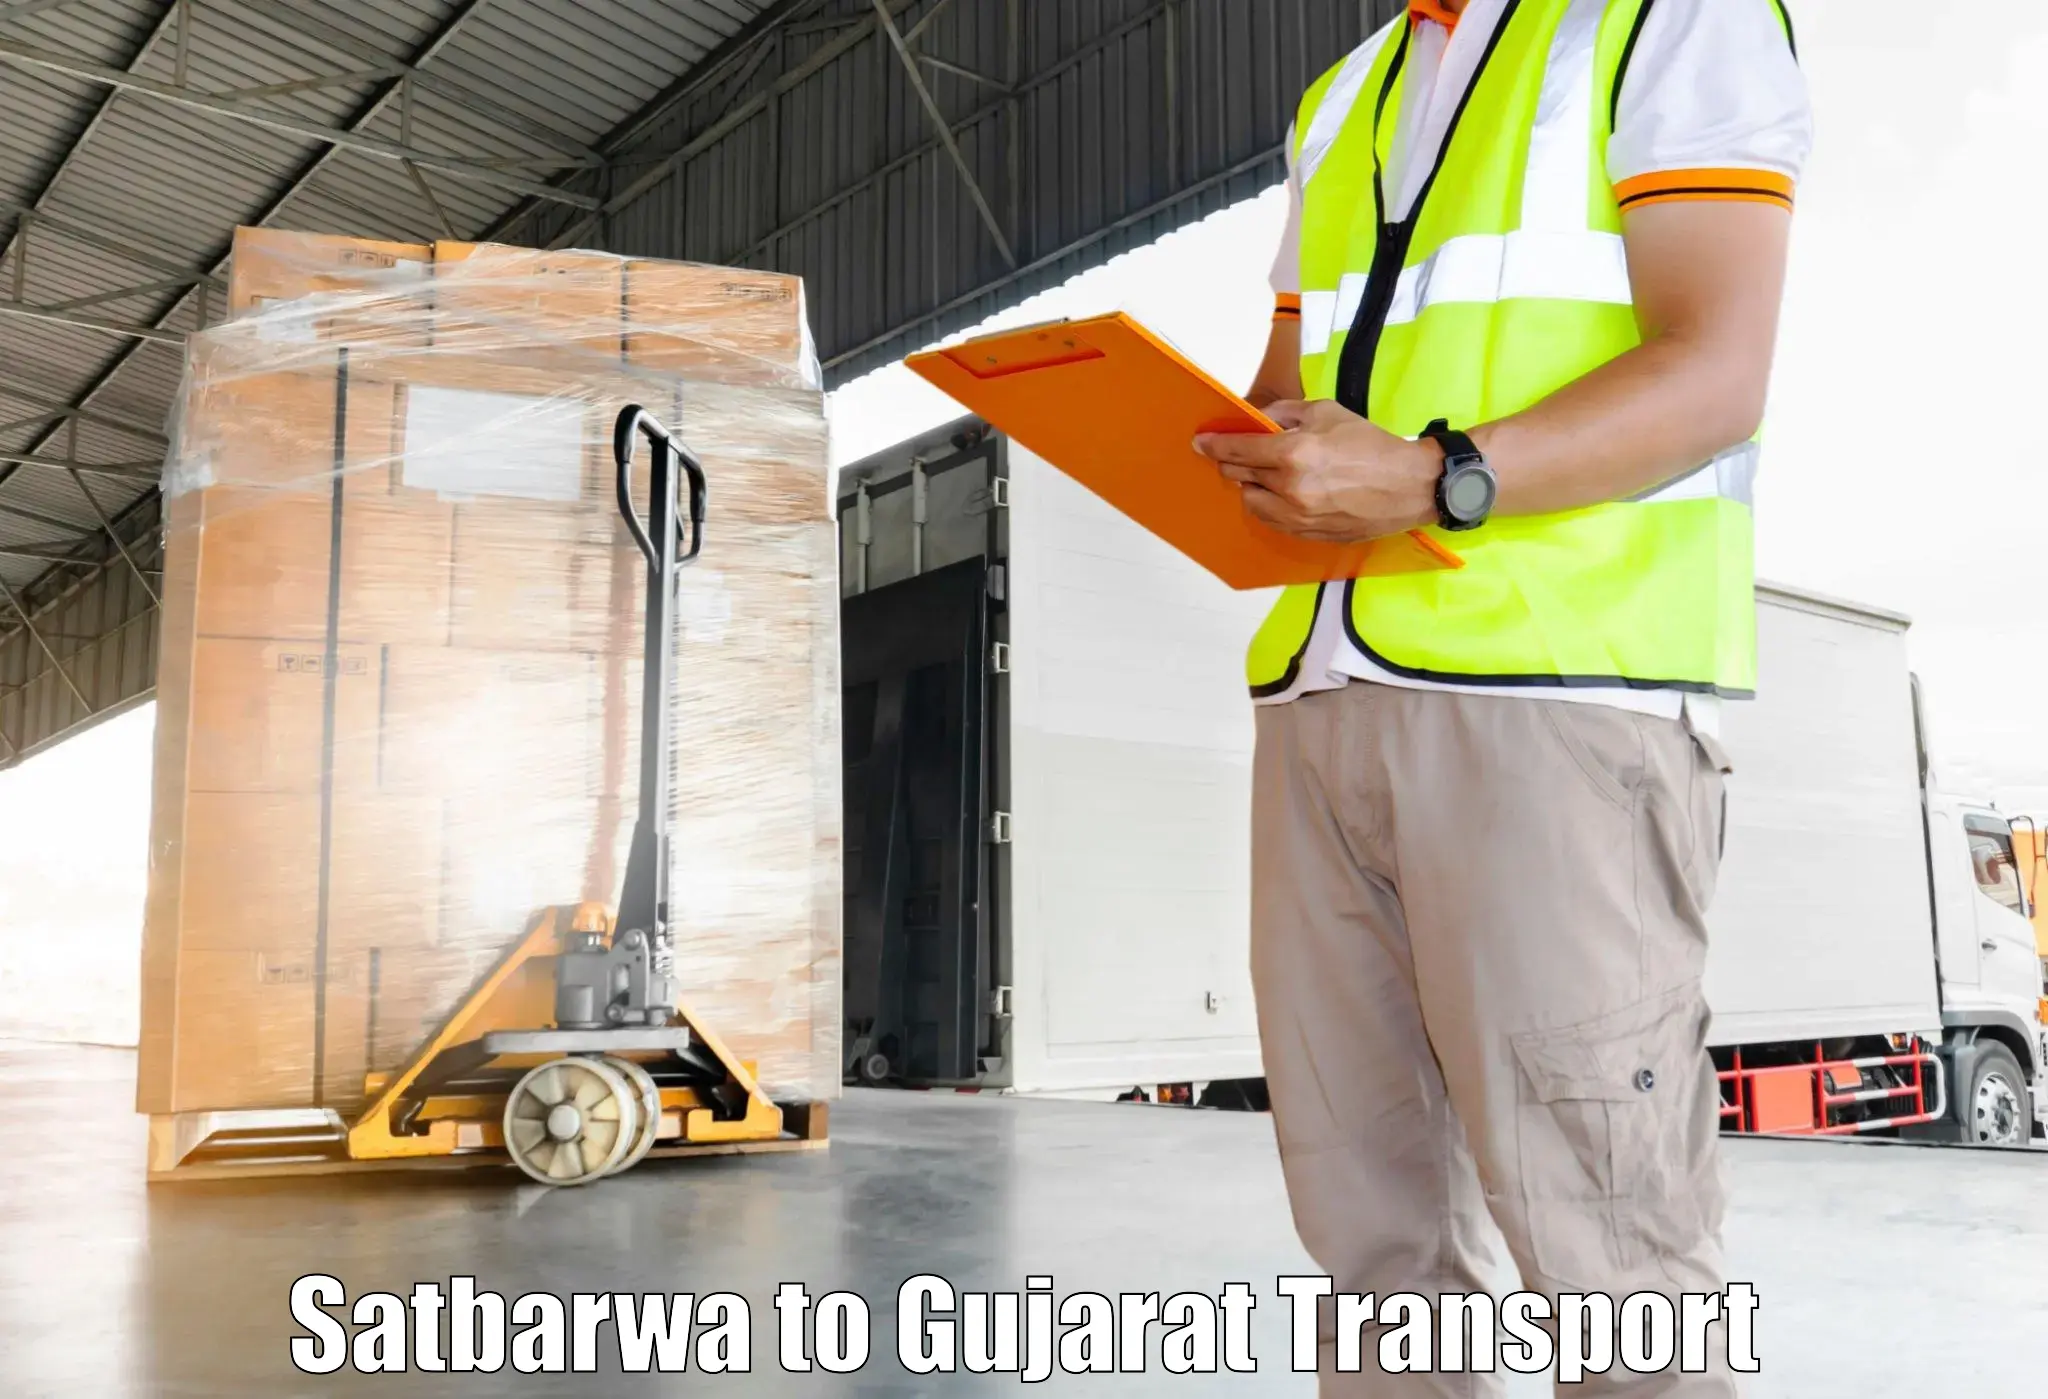 Goods delivery service Satbarwa to Mehsana